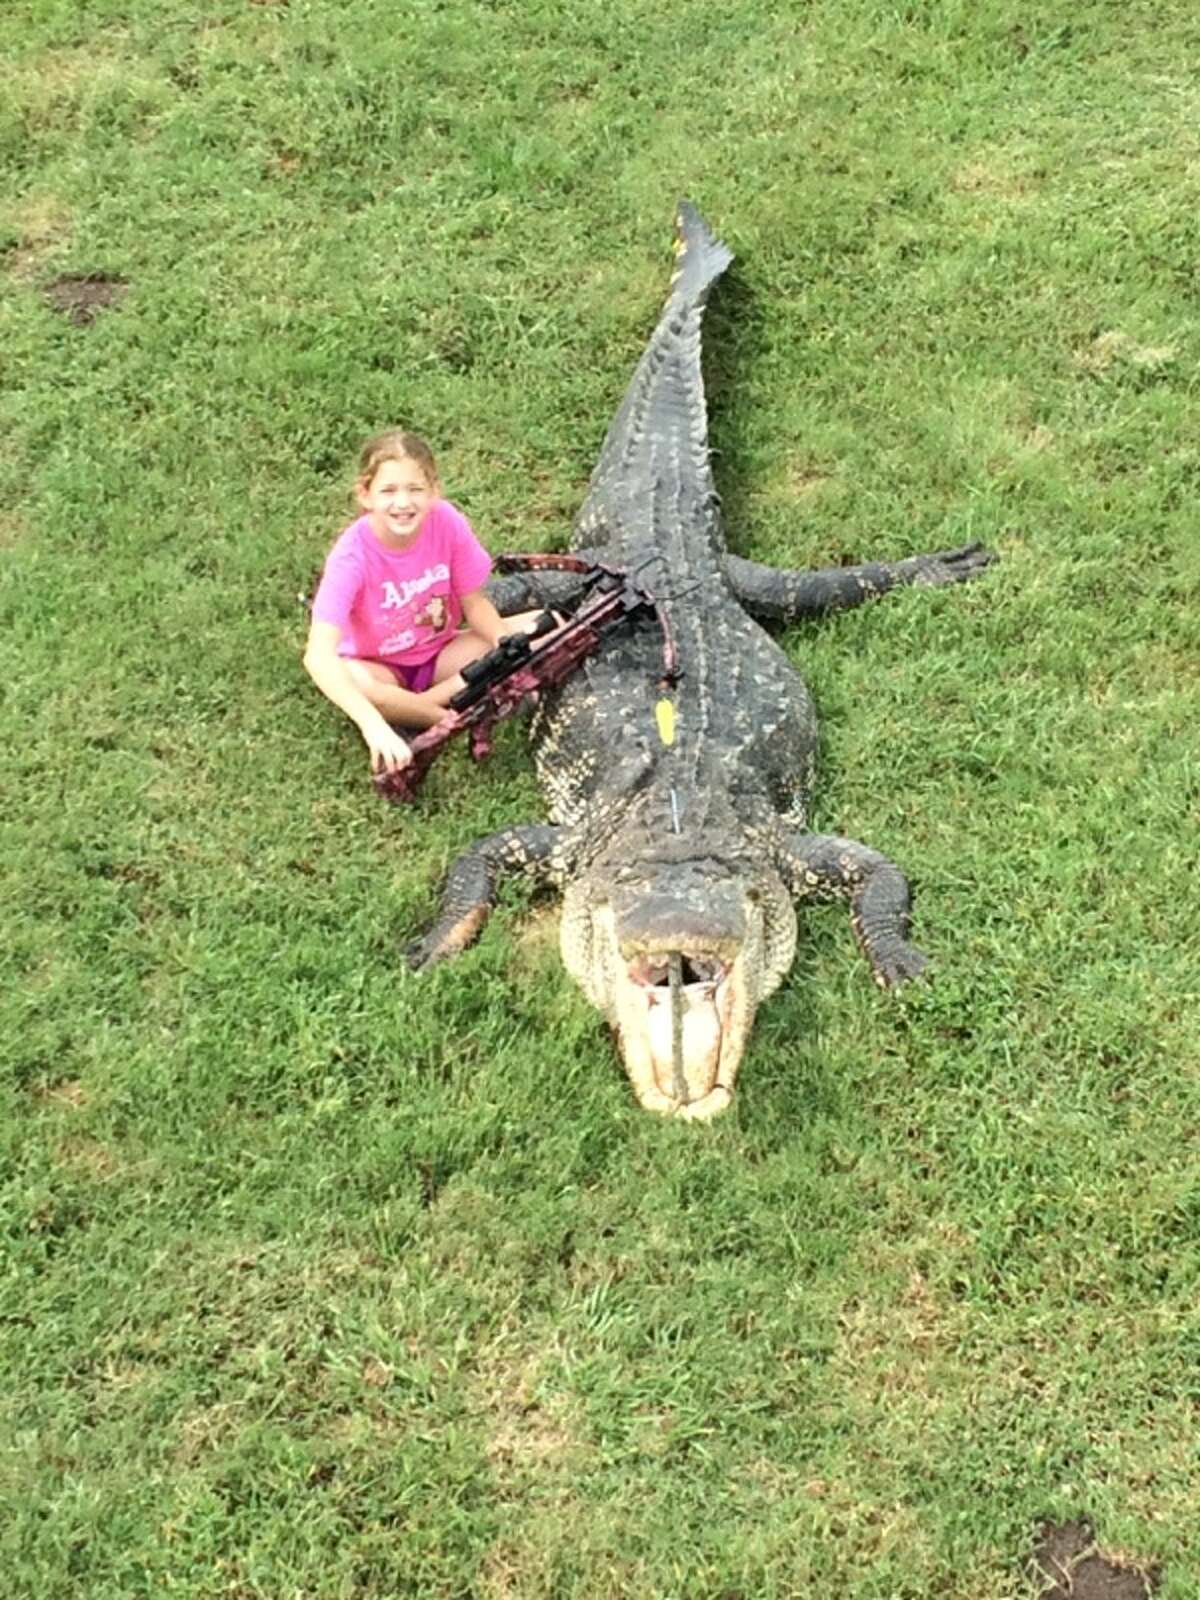 He said the gator was baited and hooked in the middle of the river with a log and rope.